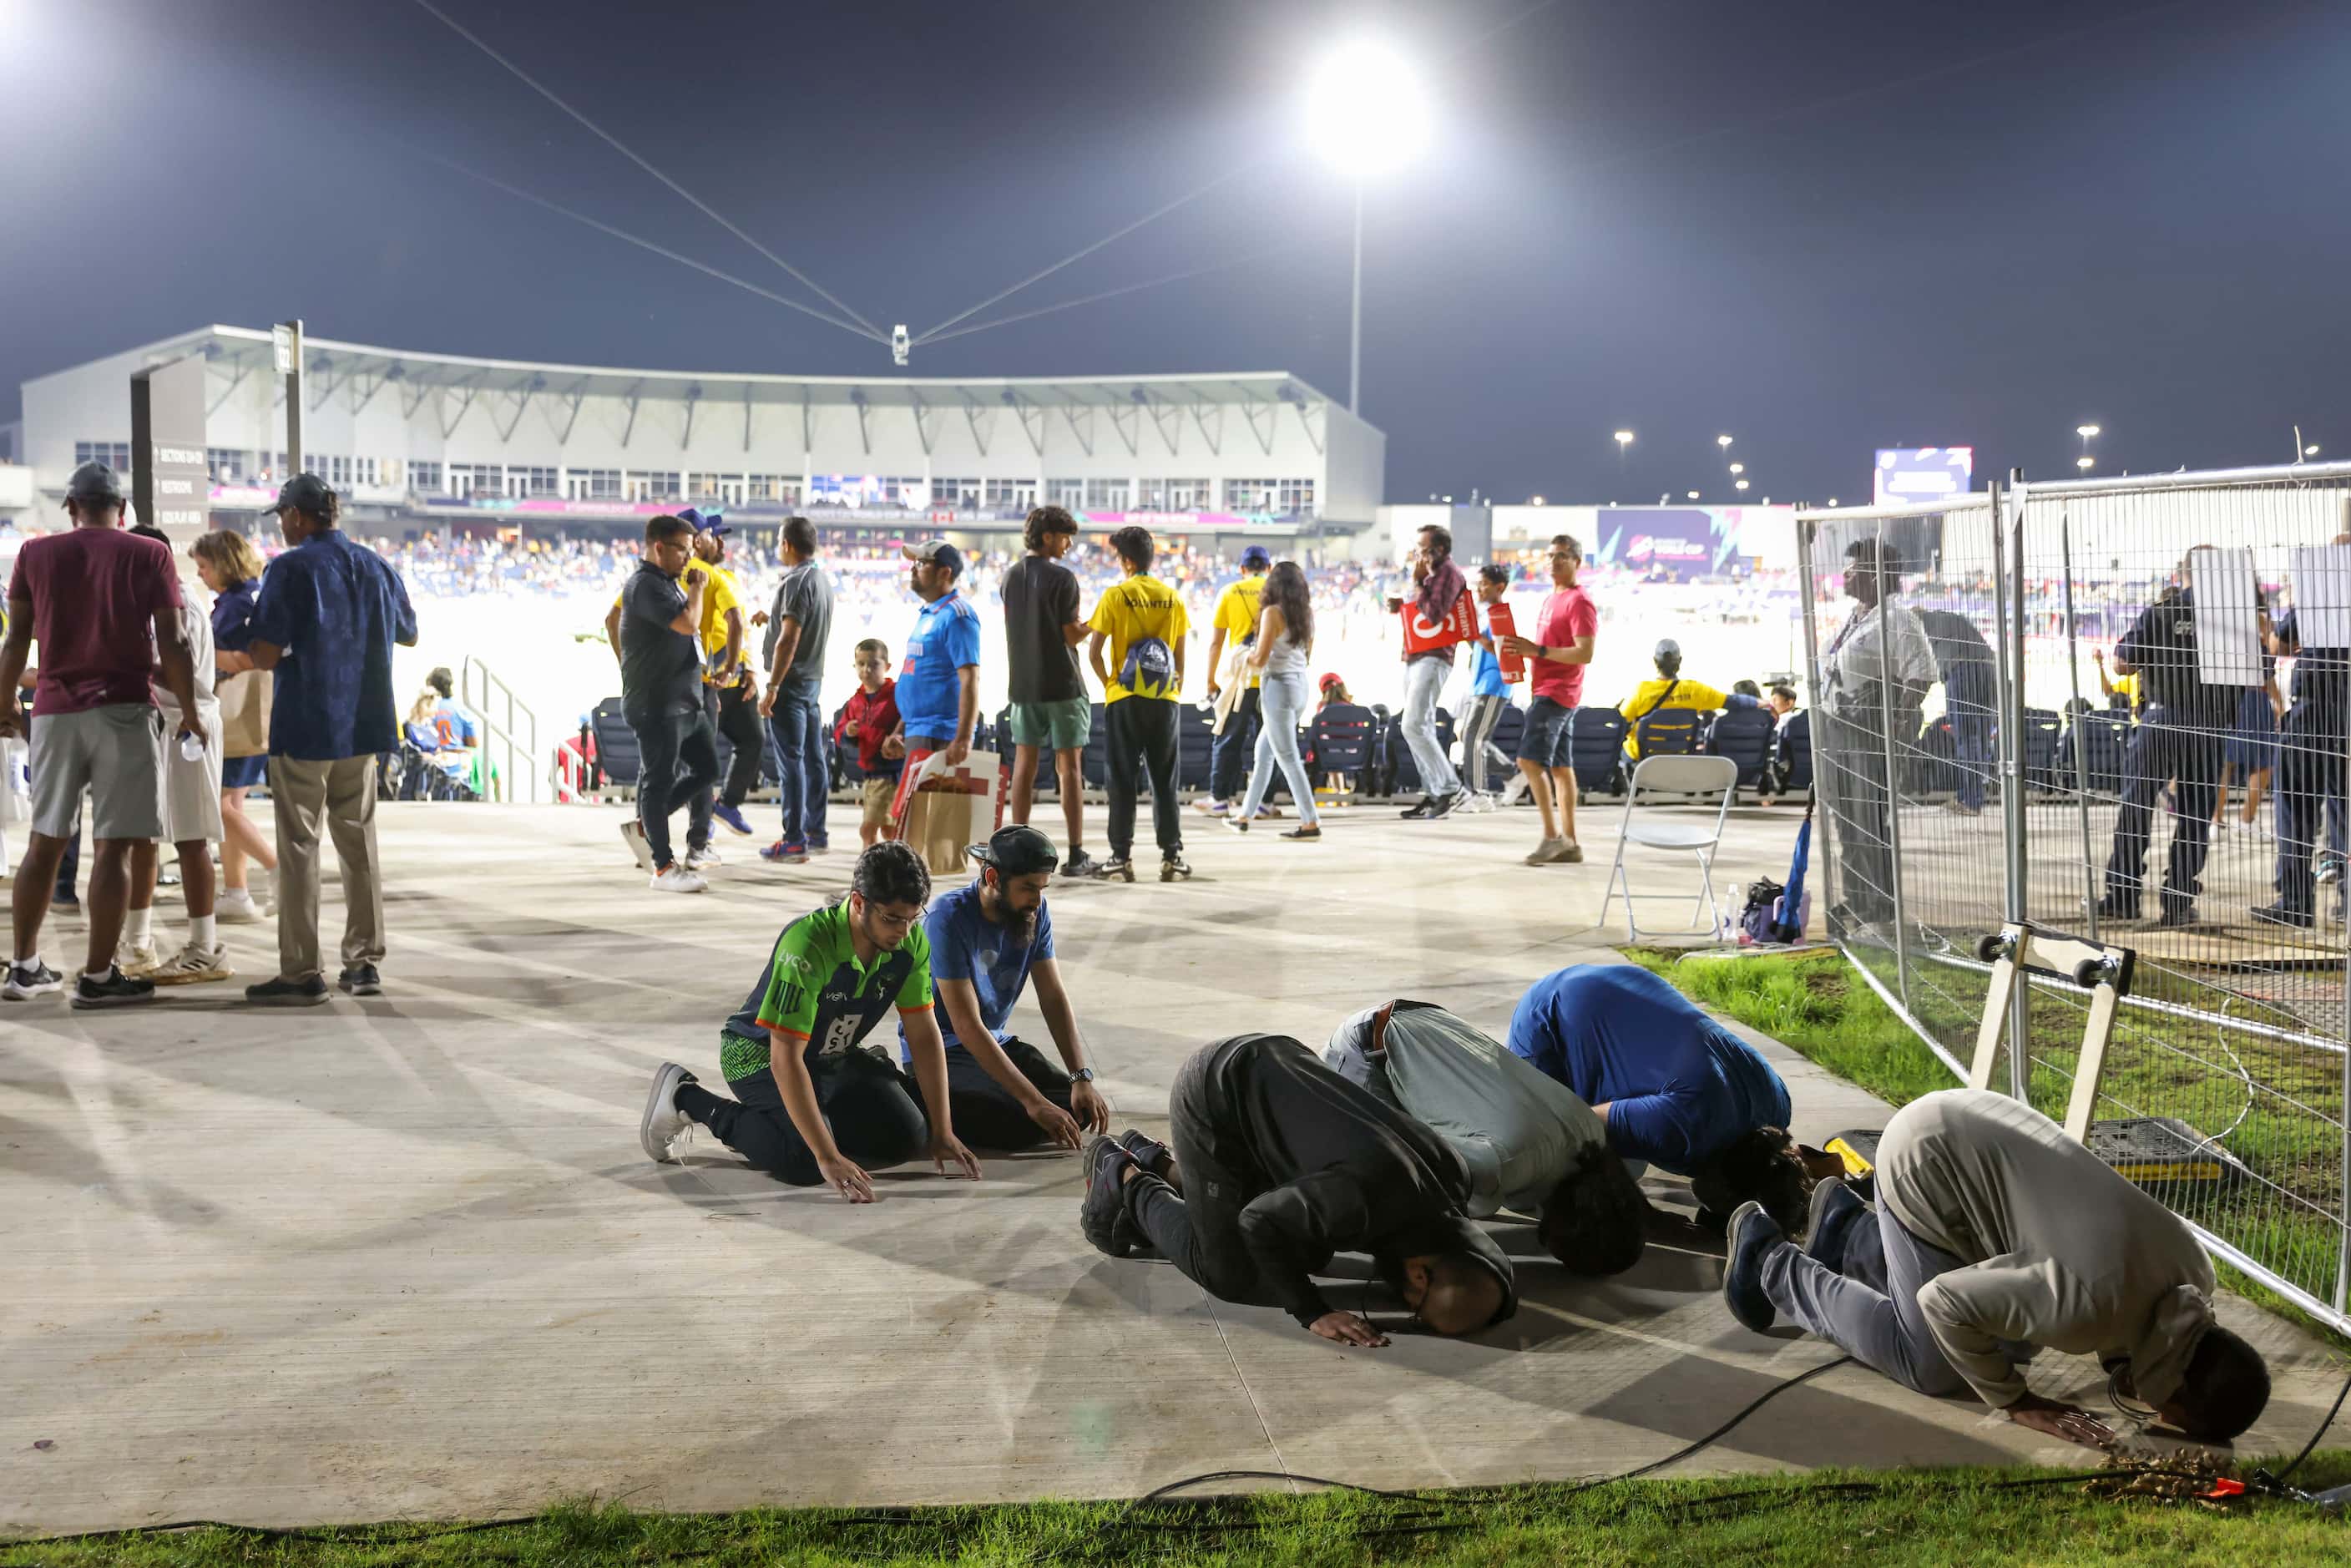 Muslims pray Isha, as other go around the concourse during the men's T20 World Cup cricket...